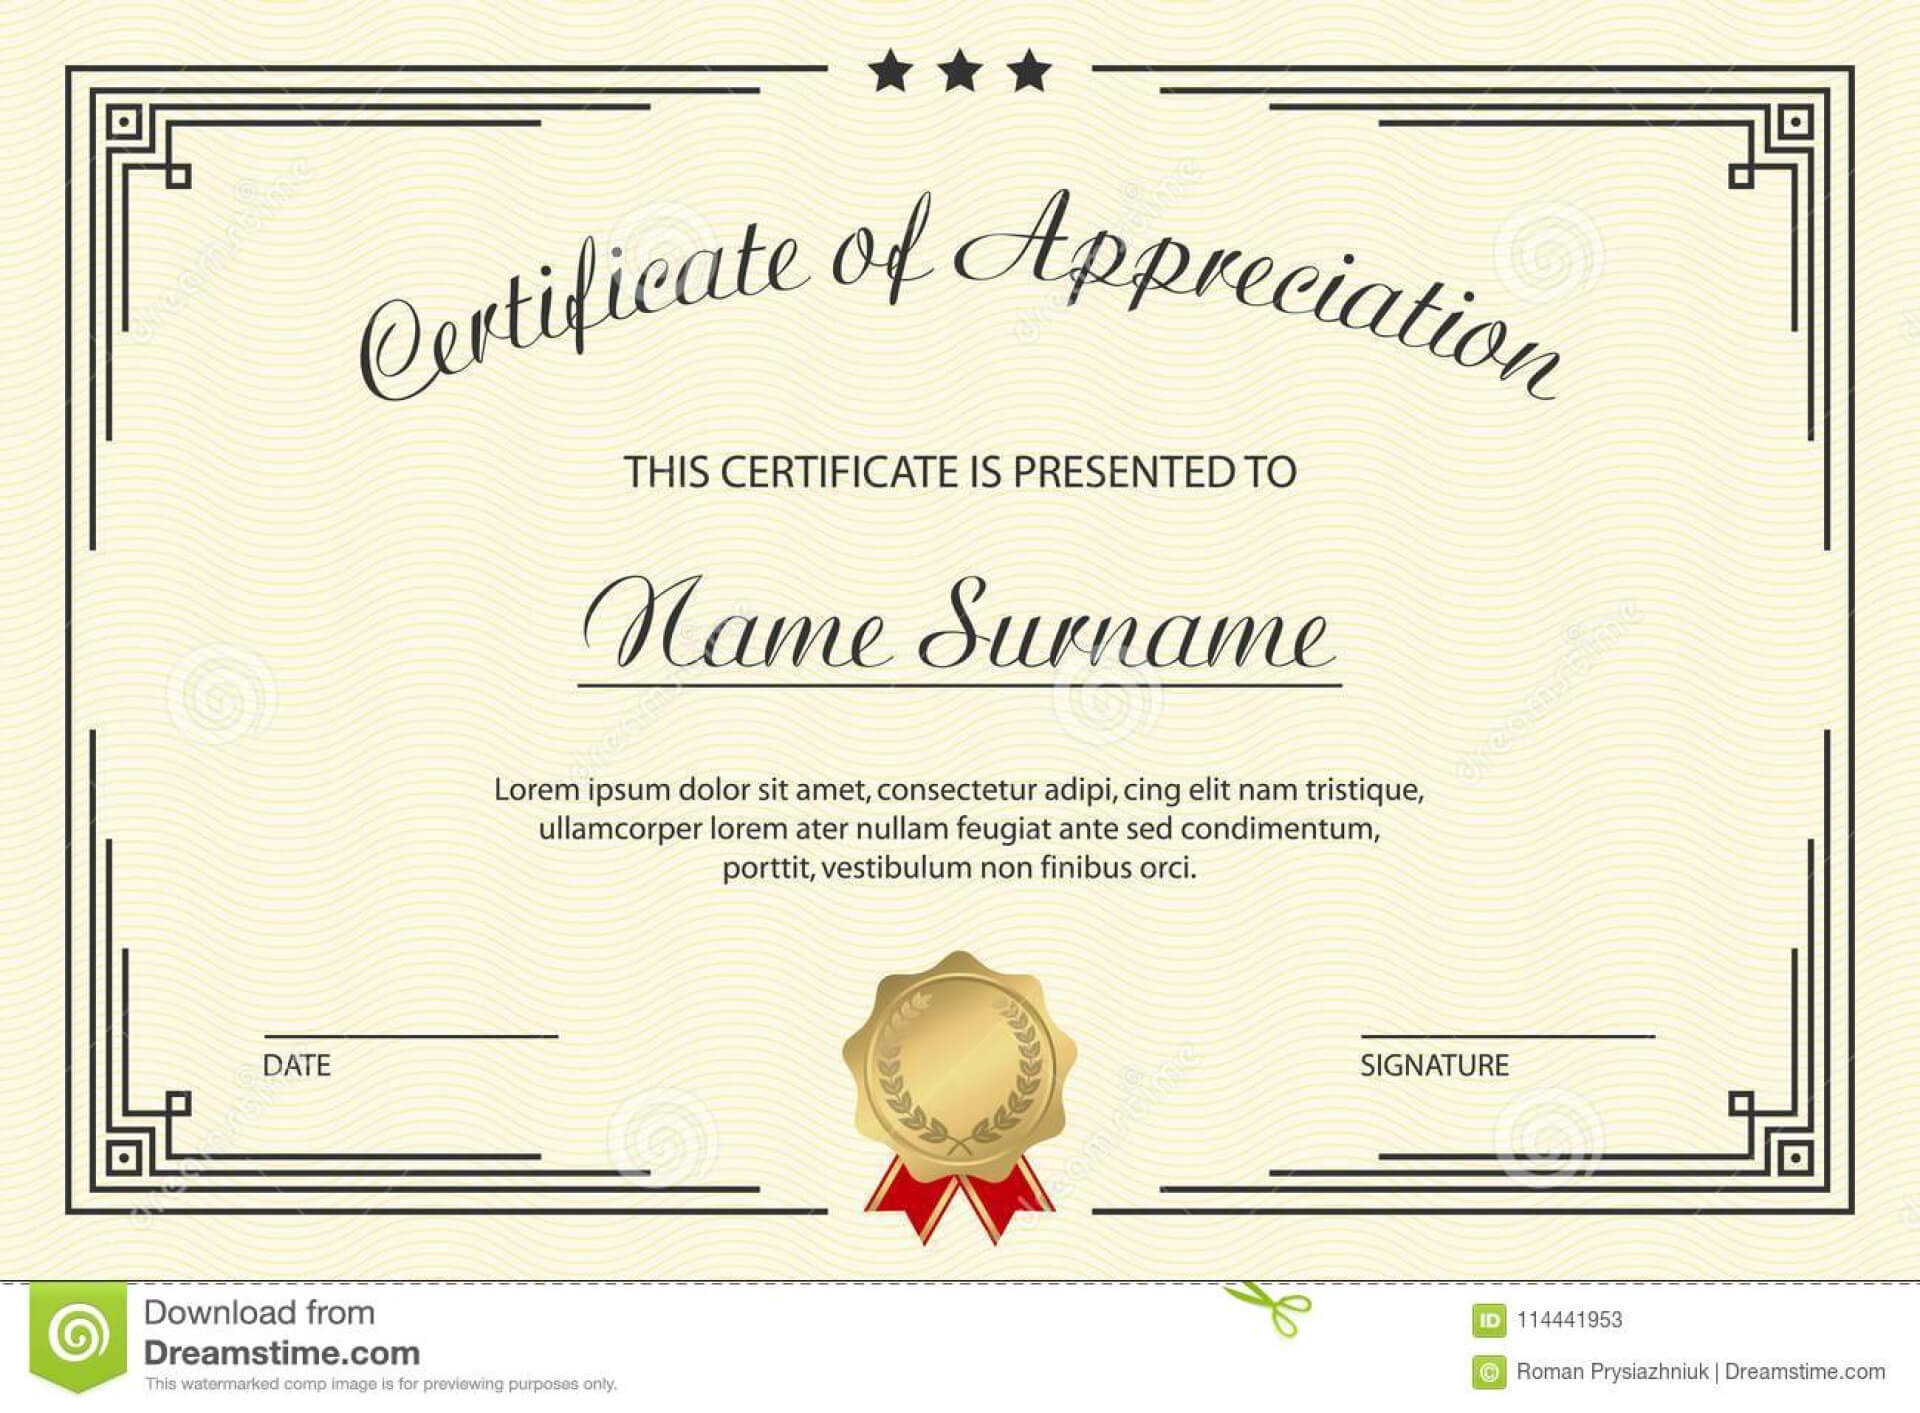 Army Certificate Of Appreciation Template Ppt Throughout Army Certificate Of Appreciation Template